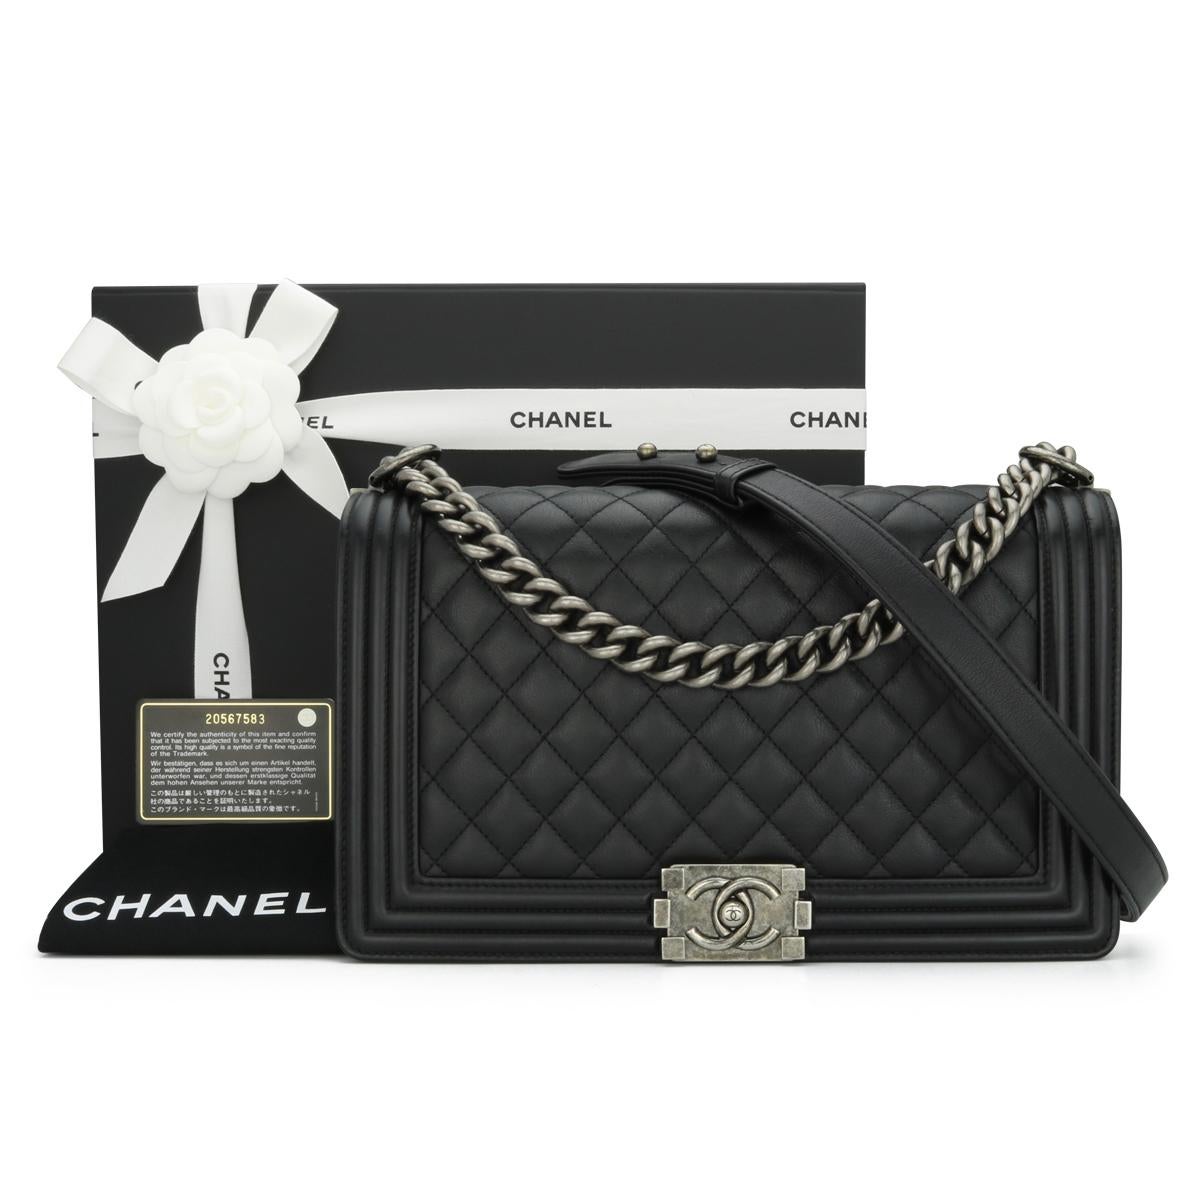 CHANEL New Medium Quilted Boy Bag in Black Calfskin with Ruthenium Hardware 2015 – 15C.

This stunning bag is still in very good condition. It still holds its original shape, and the hardware is still very clean and shiny.

- Exterior Condition: